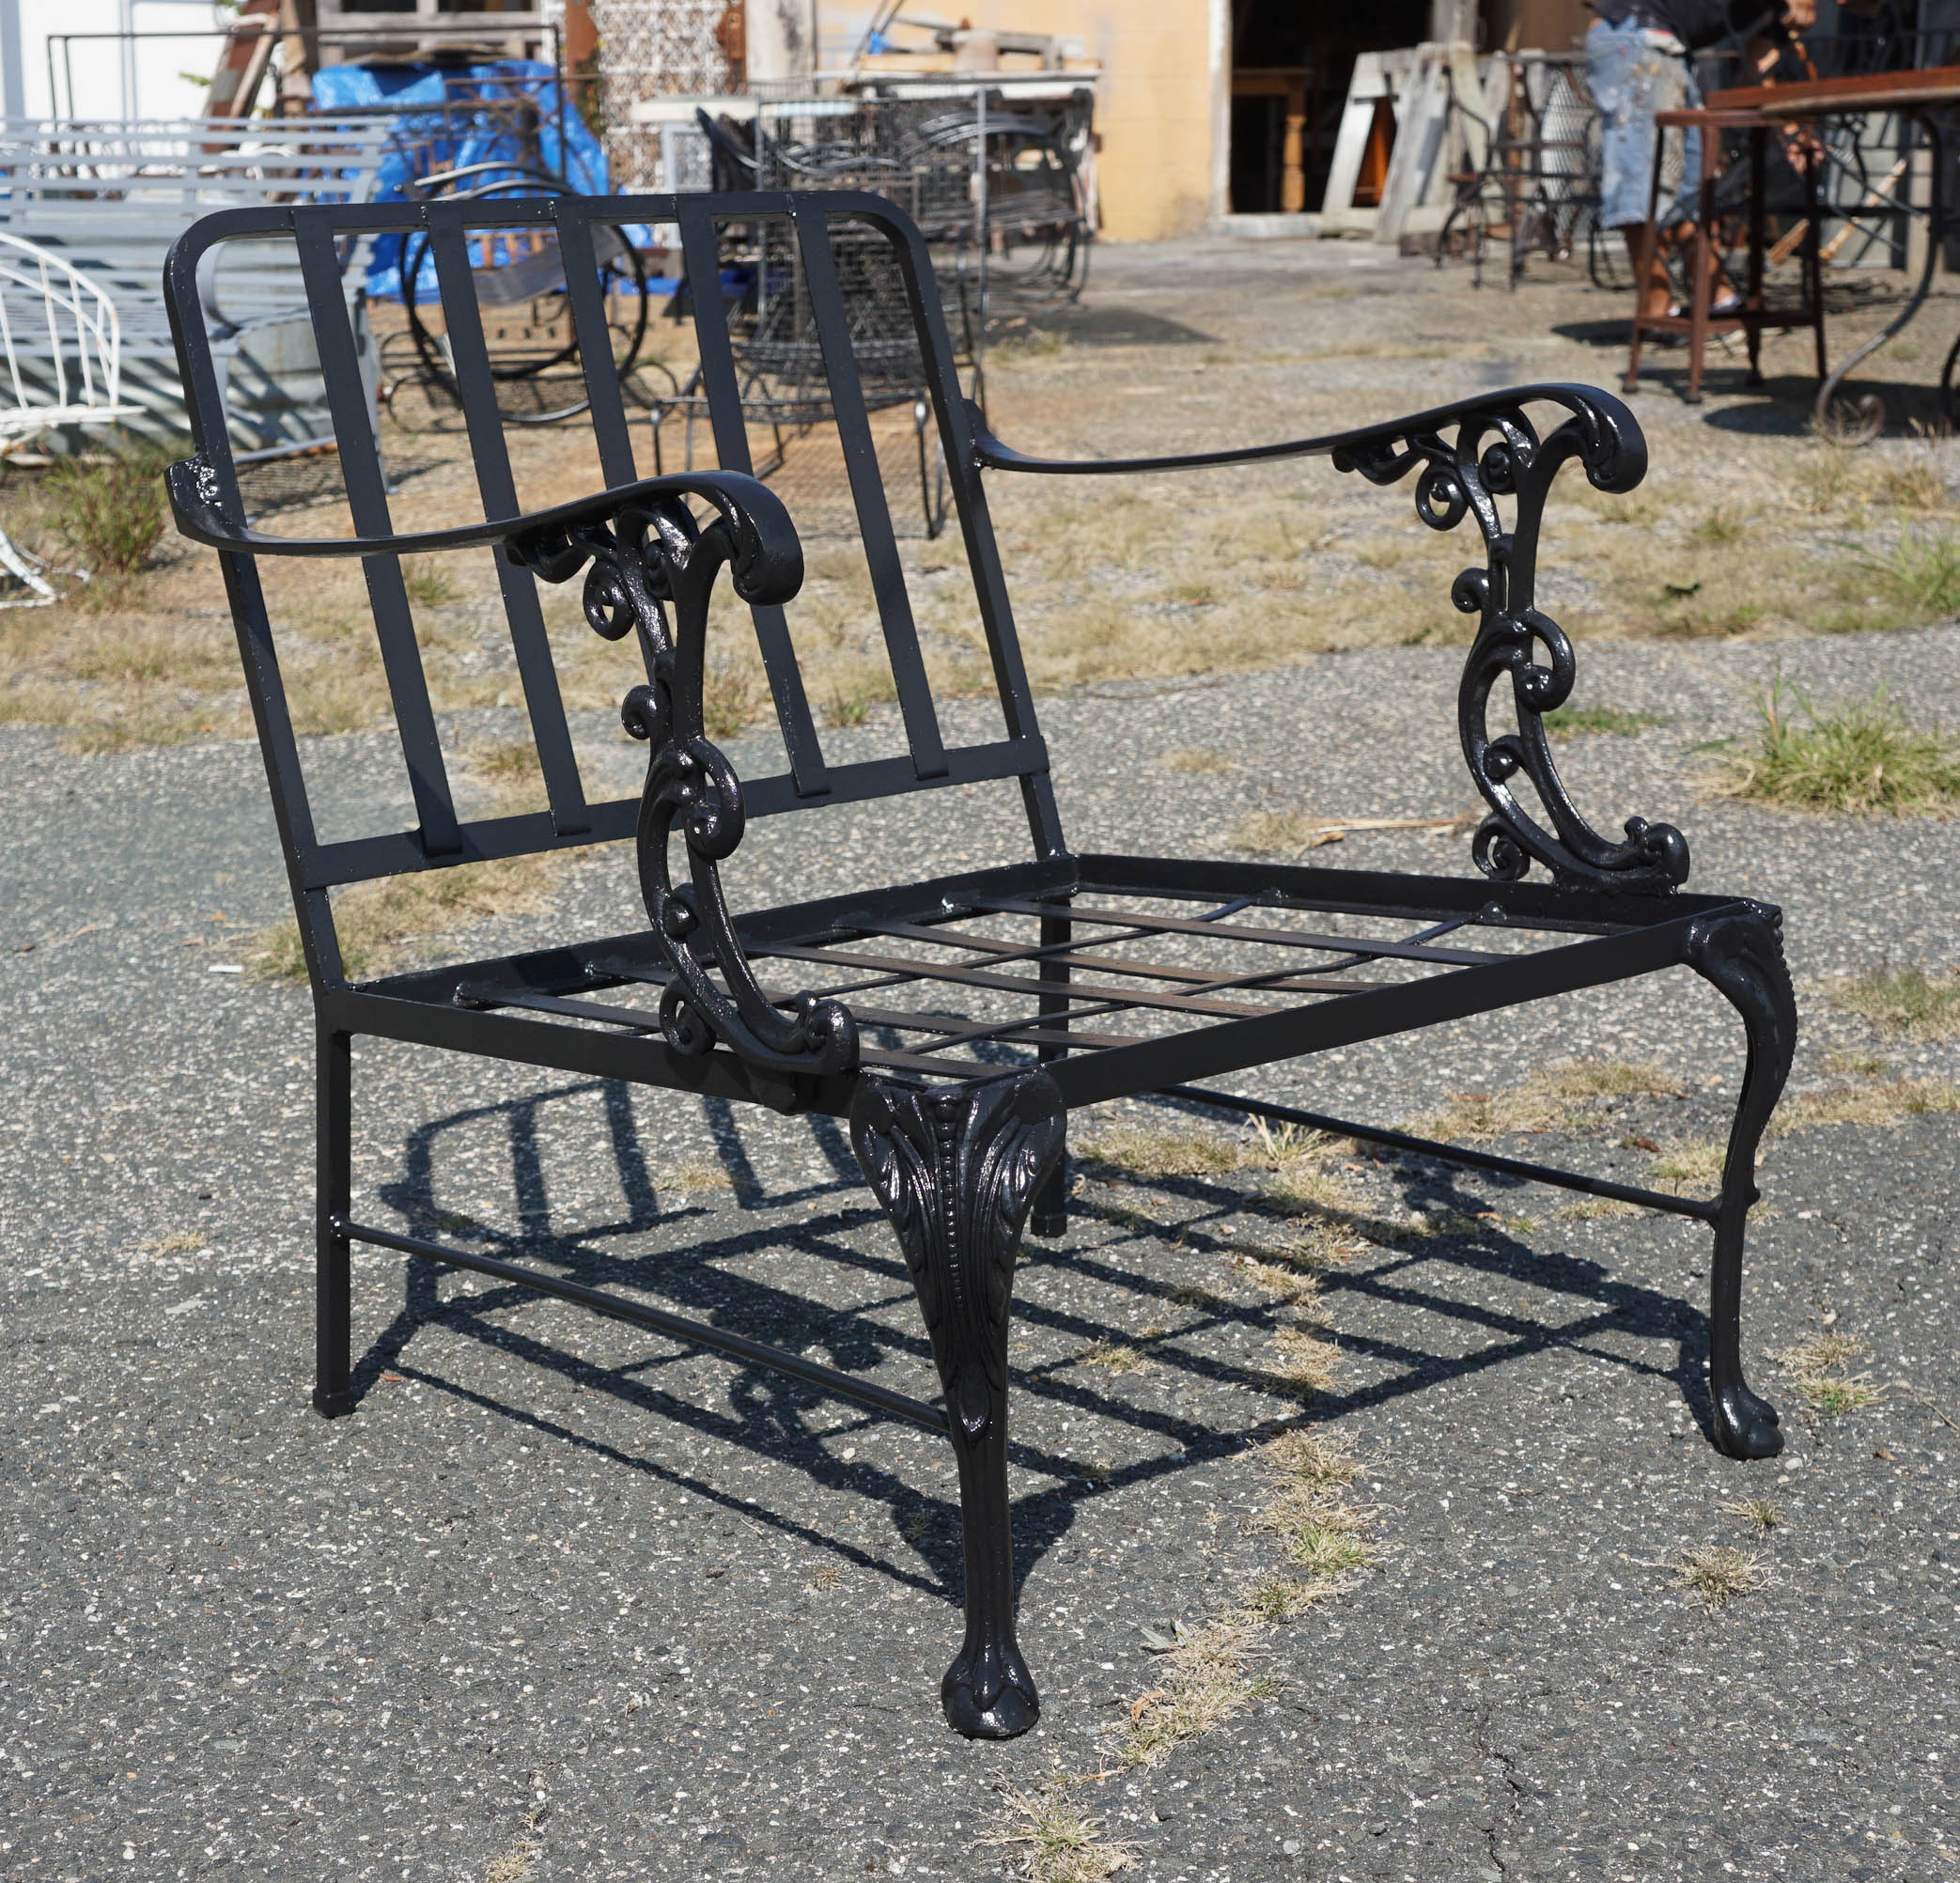 This set of three outdoor metal garden seating ensemble has generously wide, wrought iron chairs, arms decorated with Rococo supports, as well as cabriole legs. The matching two-tier table has similar features. Third matching chair with ottoman is